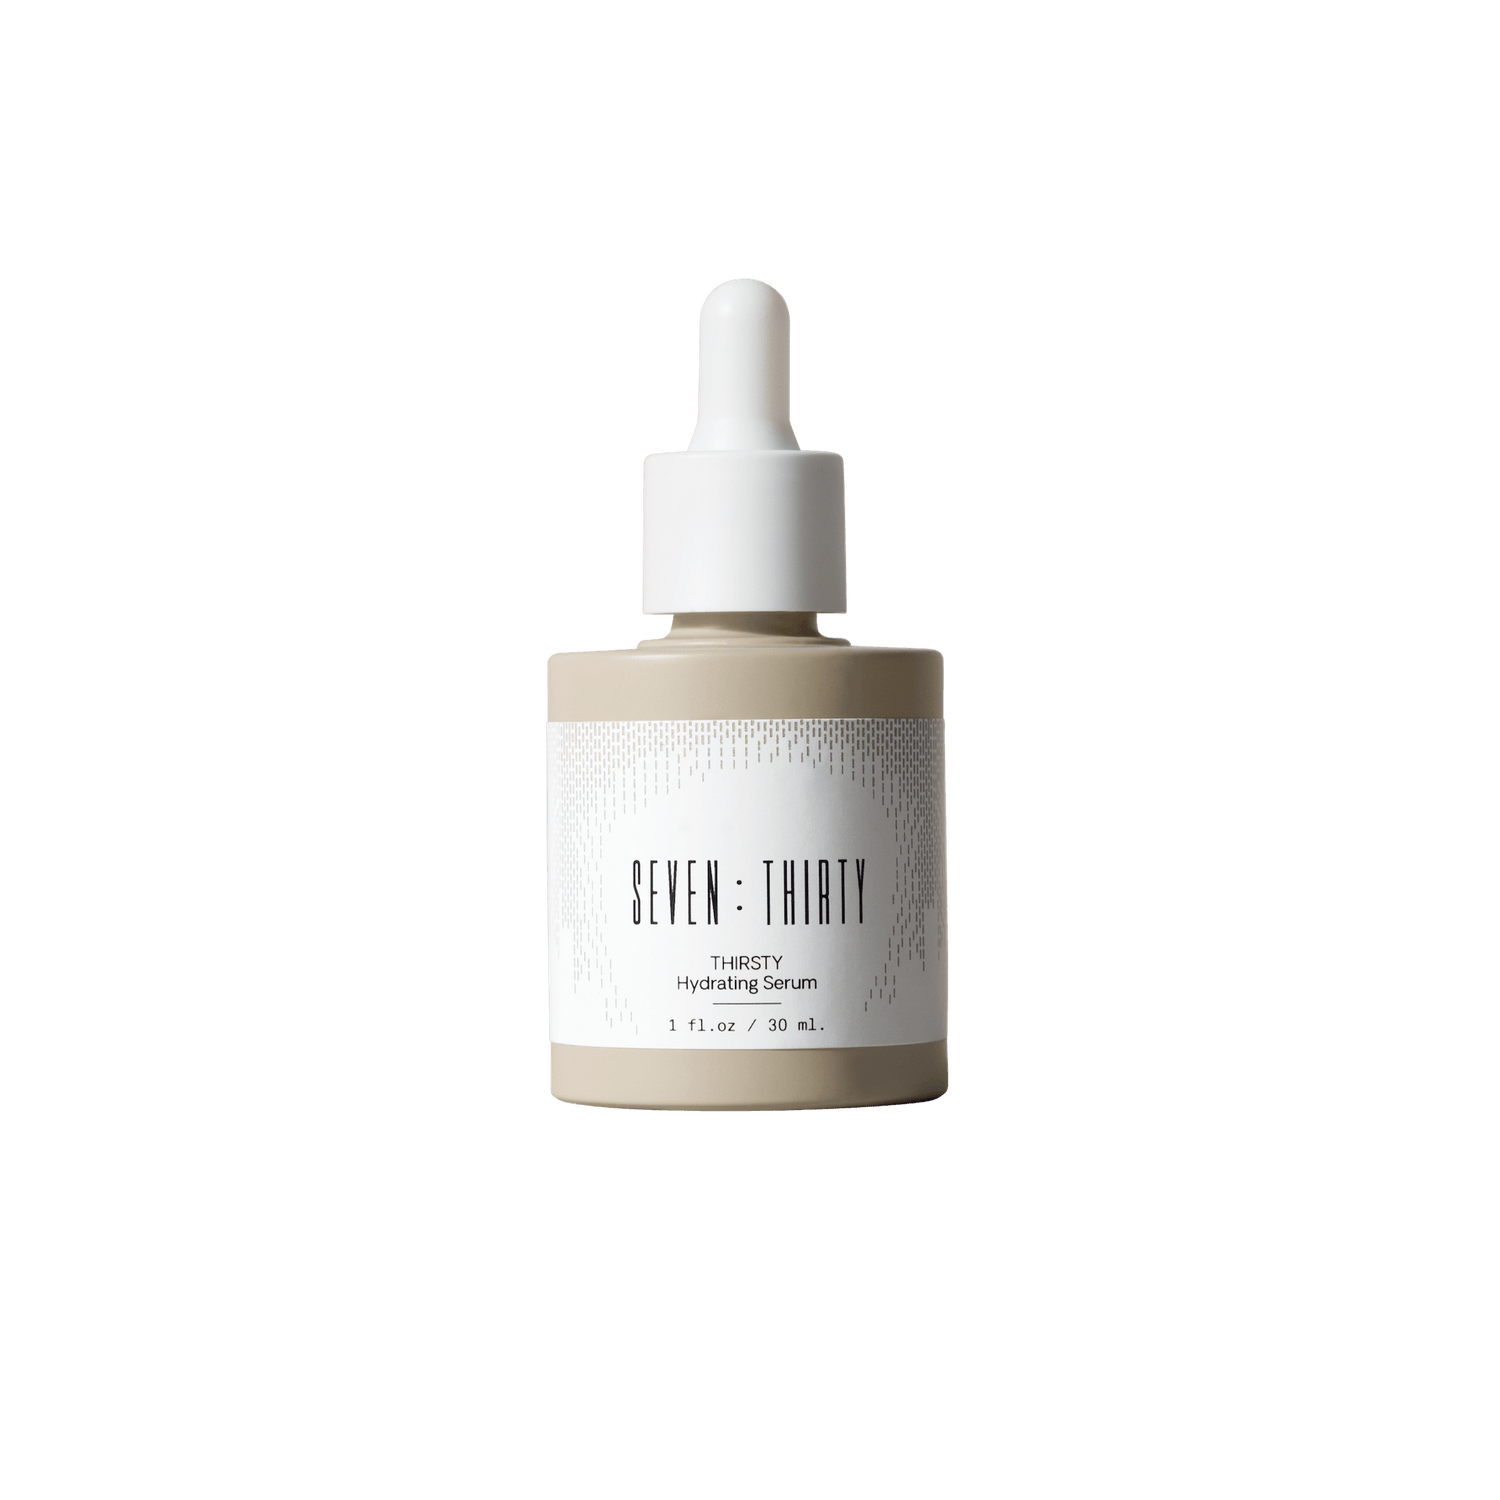 THIRSTY Hydrating Serum on a white background